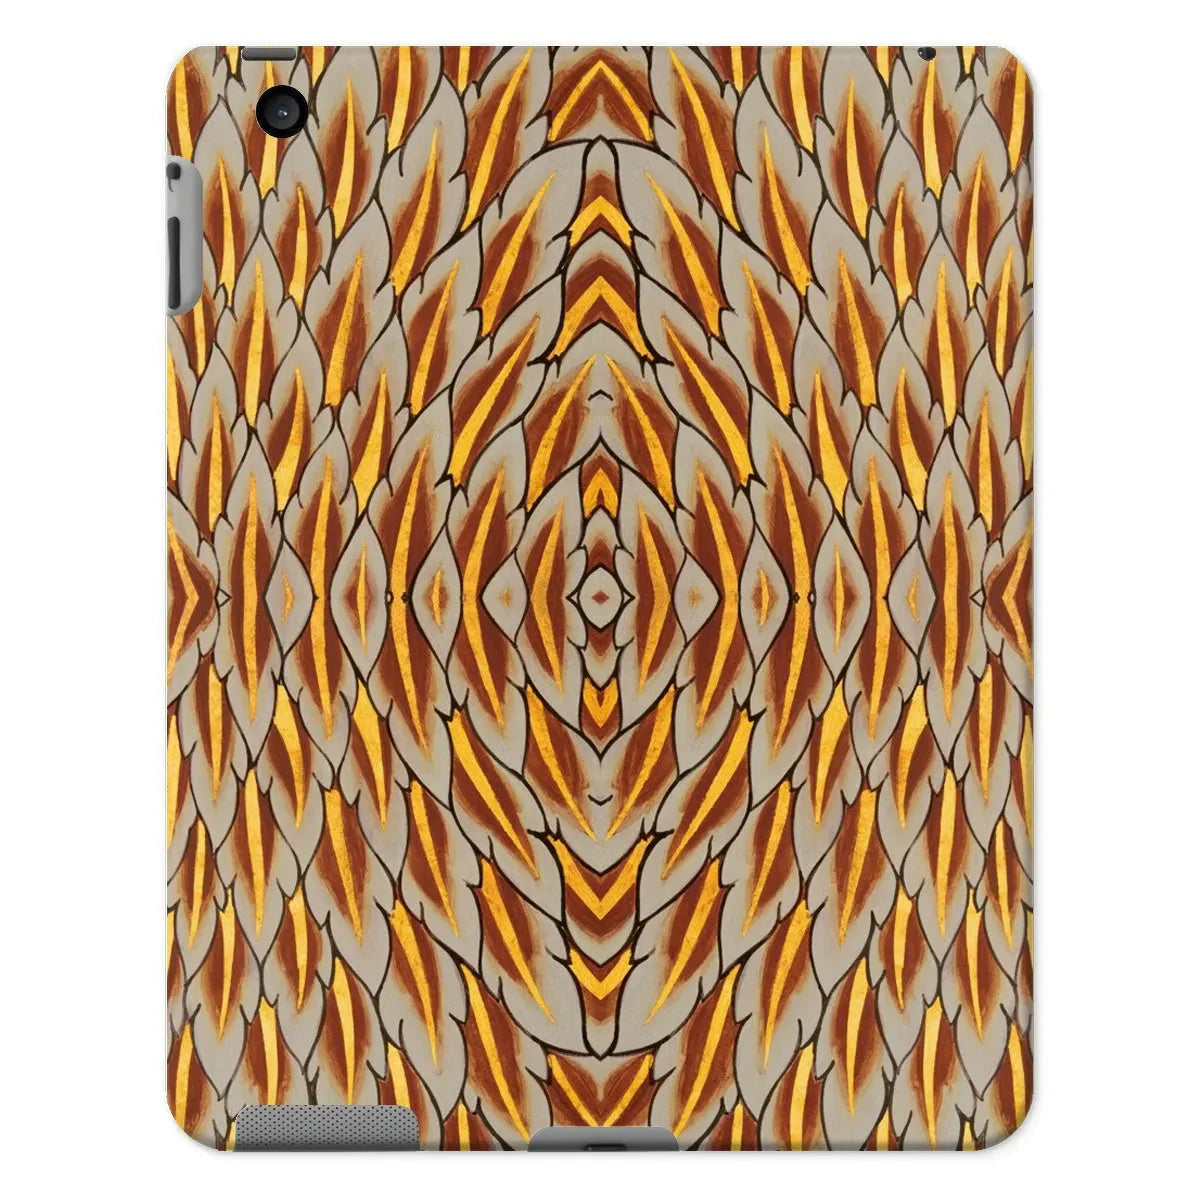 Featherweight Champion Aesthetic Ipad Case - Slim Designer Back Cover - Ipad 2/3/4 - Gloss - Tablet Computers